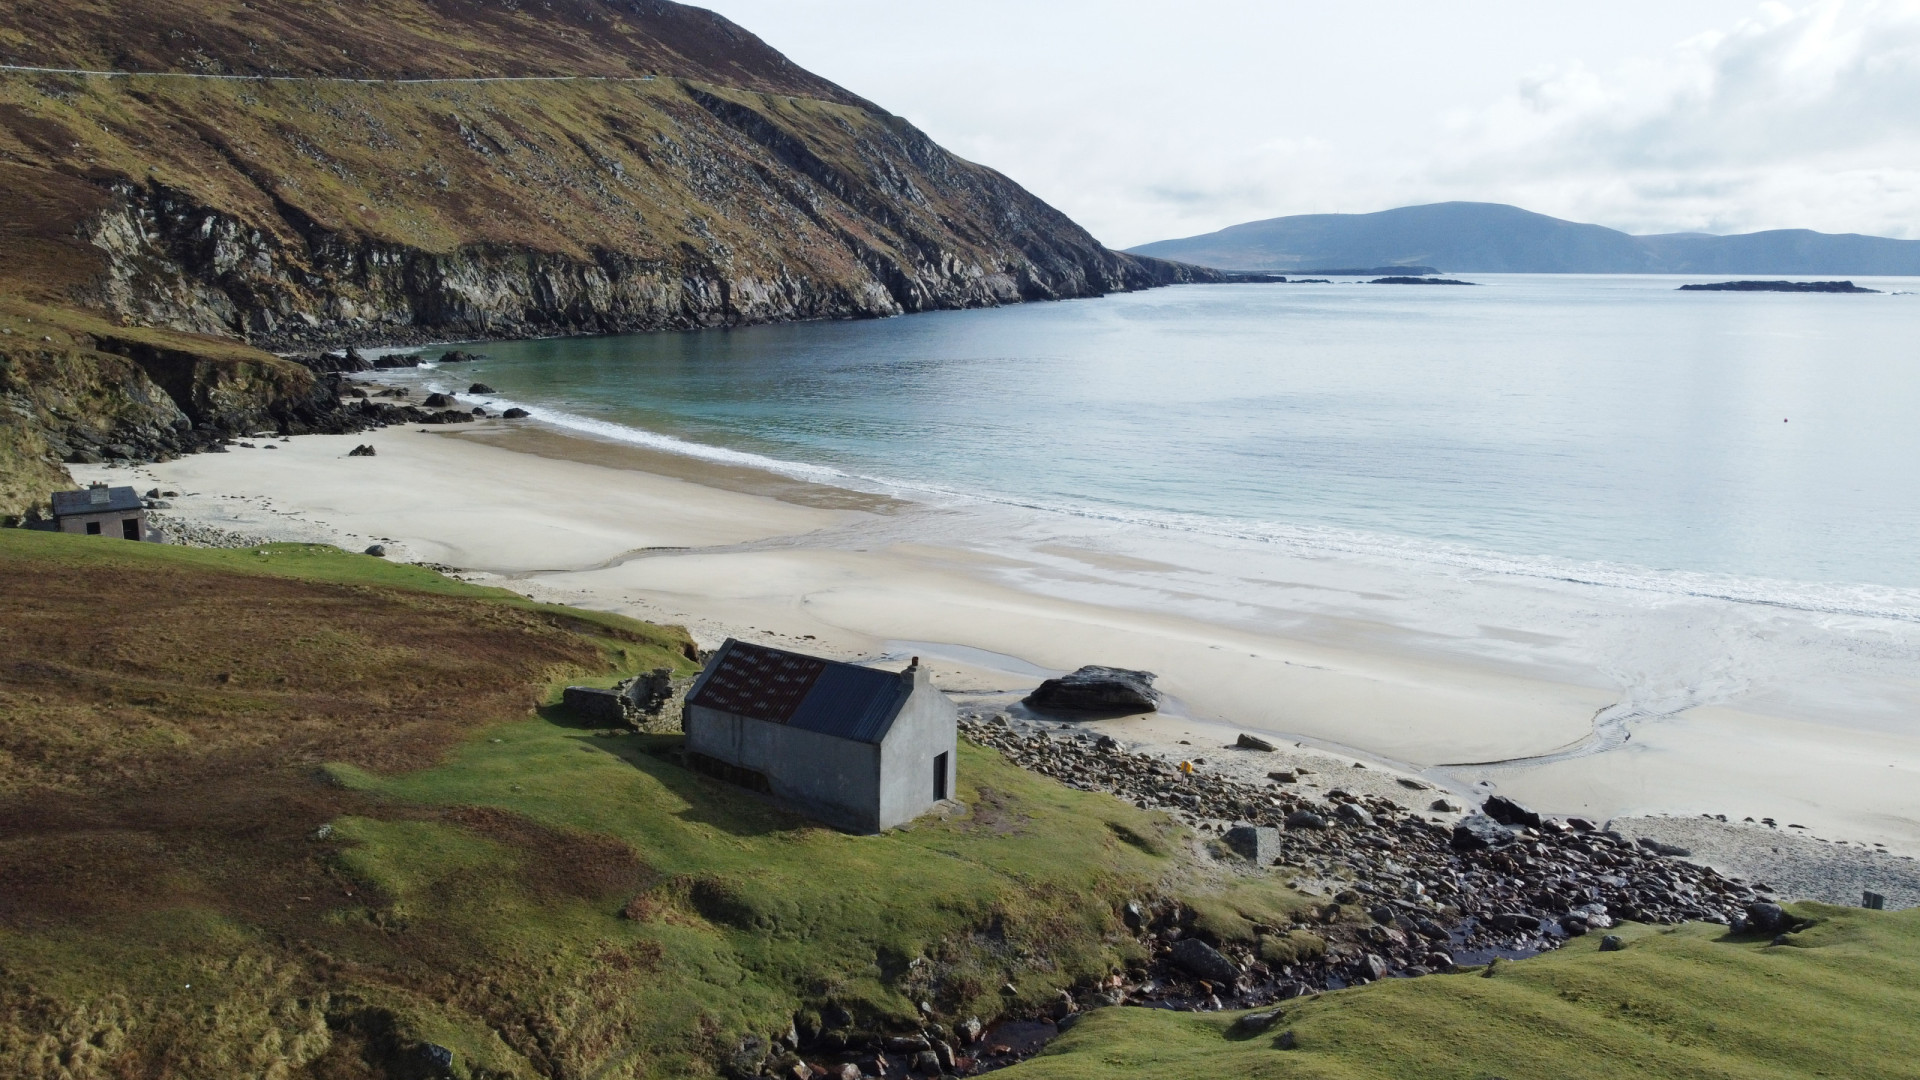 <p>Home to 2,500 residents, Achill is the largest inhabited island off the Irish coast. It's a favorite among artists and photographers, thanks to its dramatic scenery.</p><p>You may also like:<a href="https://www.starsinsider.com/n/267509?utm_source=msn.com&utm_medium=display&utm_campaign=referral_description&utm_content=621106en-au"> The real pirates of the Caribbean</a></p>